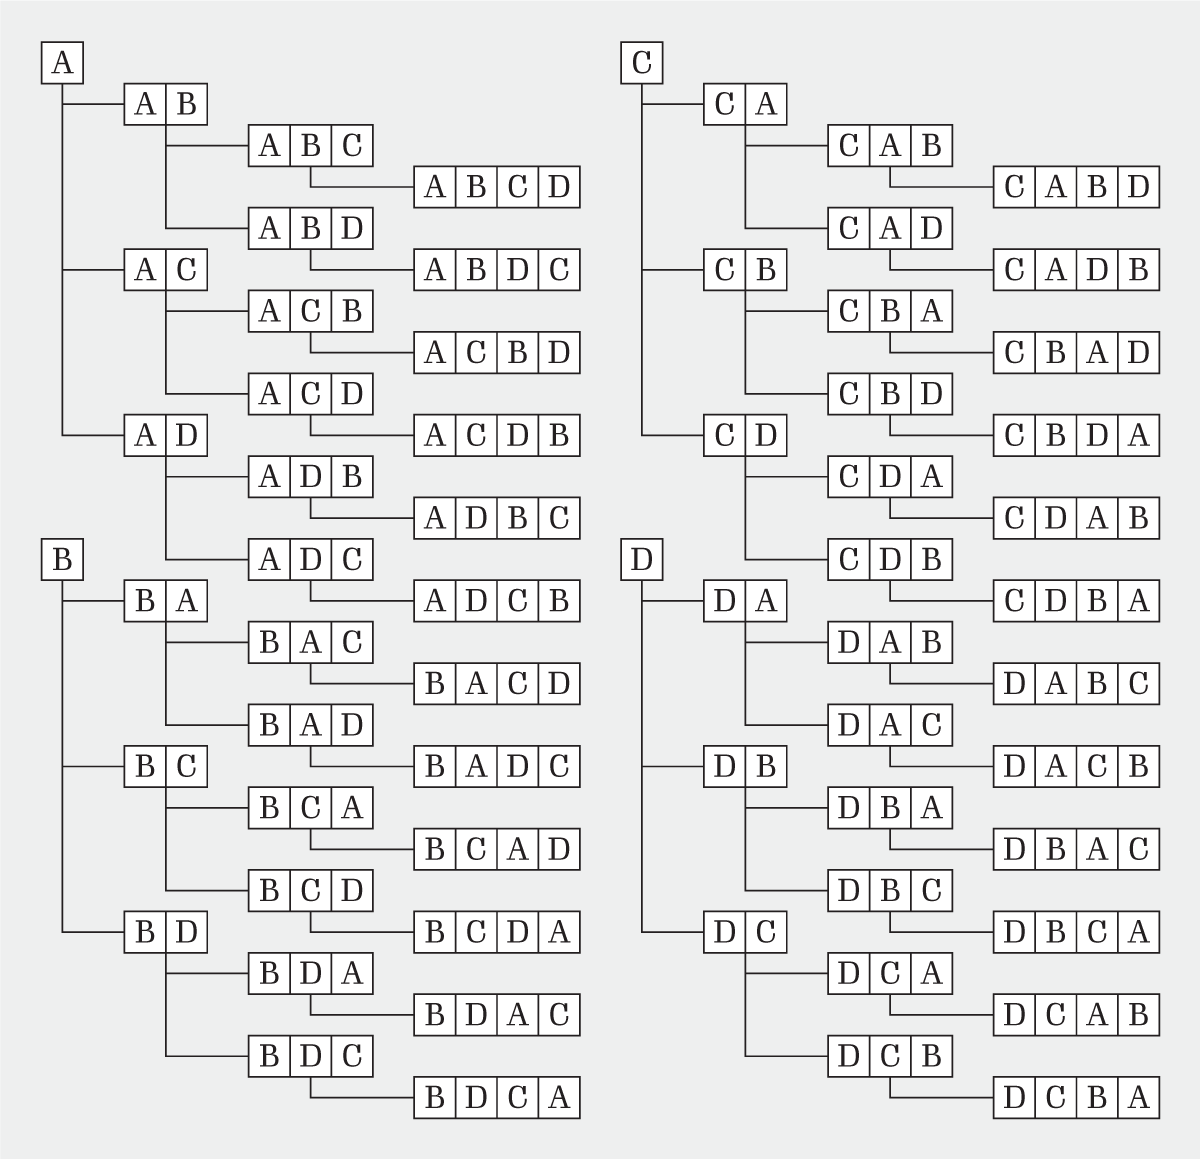 A diagram showing possible sequences of letters from A to D. On the left, the letter A is shown with lines extending to three possible two-letter sequences that could follow from it: A-B, A-C, A-D. From each two-letter sequence are lines extending to two possible three-letter sequences. For example, extended from the A-B sequence are A-B-C and A-B-D. From each three-letter sequence is a line extending to a four-letter sequence. For example, extended from A-B-C is A-B-C-D. The process is repeated for each letter from A to D, totalling 64 sequences.